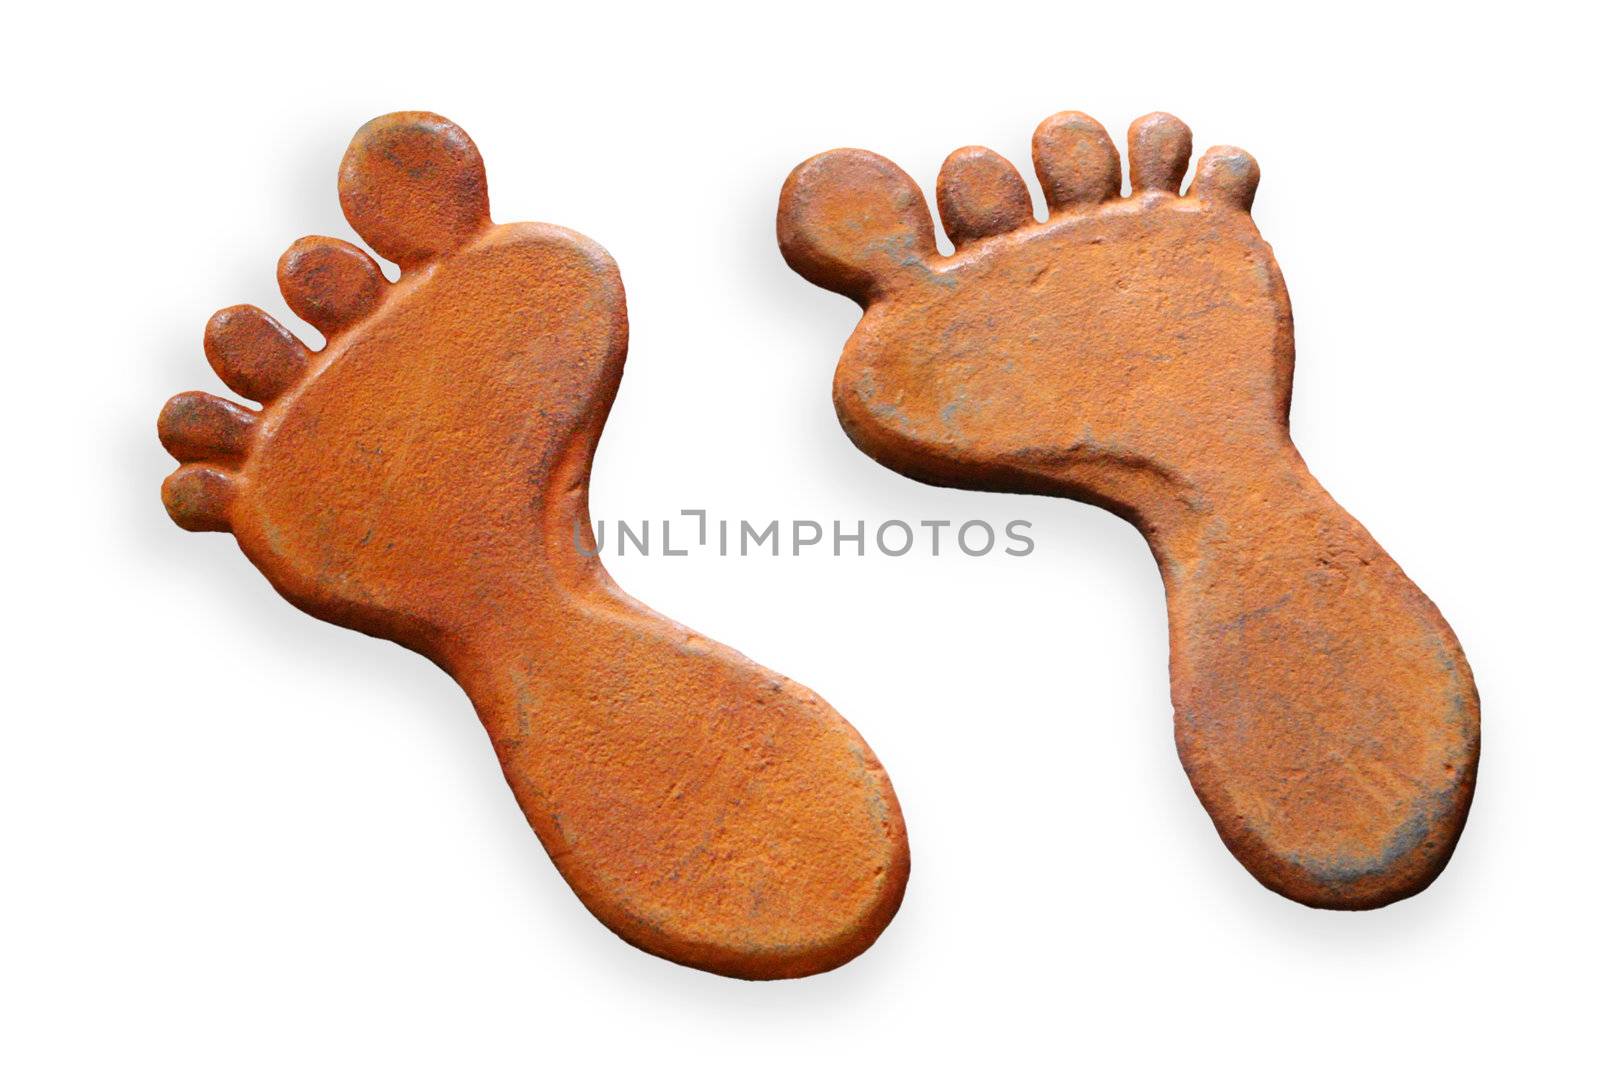 Rero-style metal feet against a pure white background with a slight shadow.